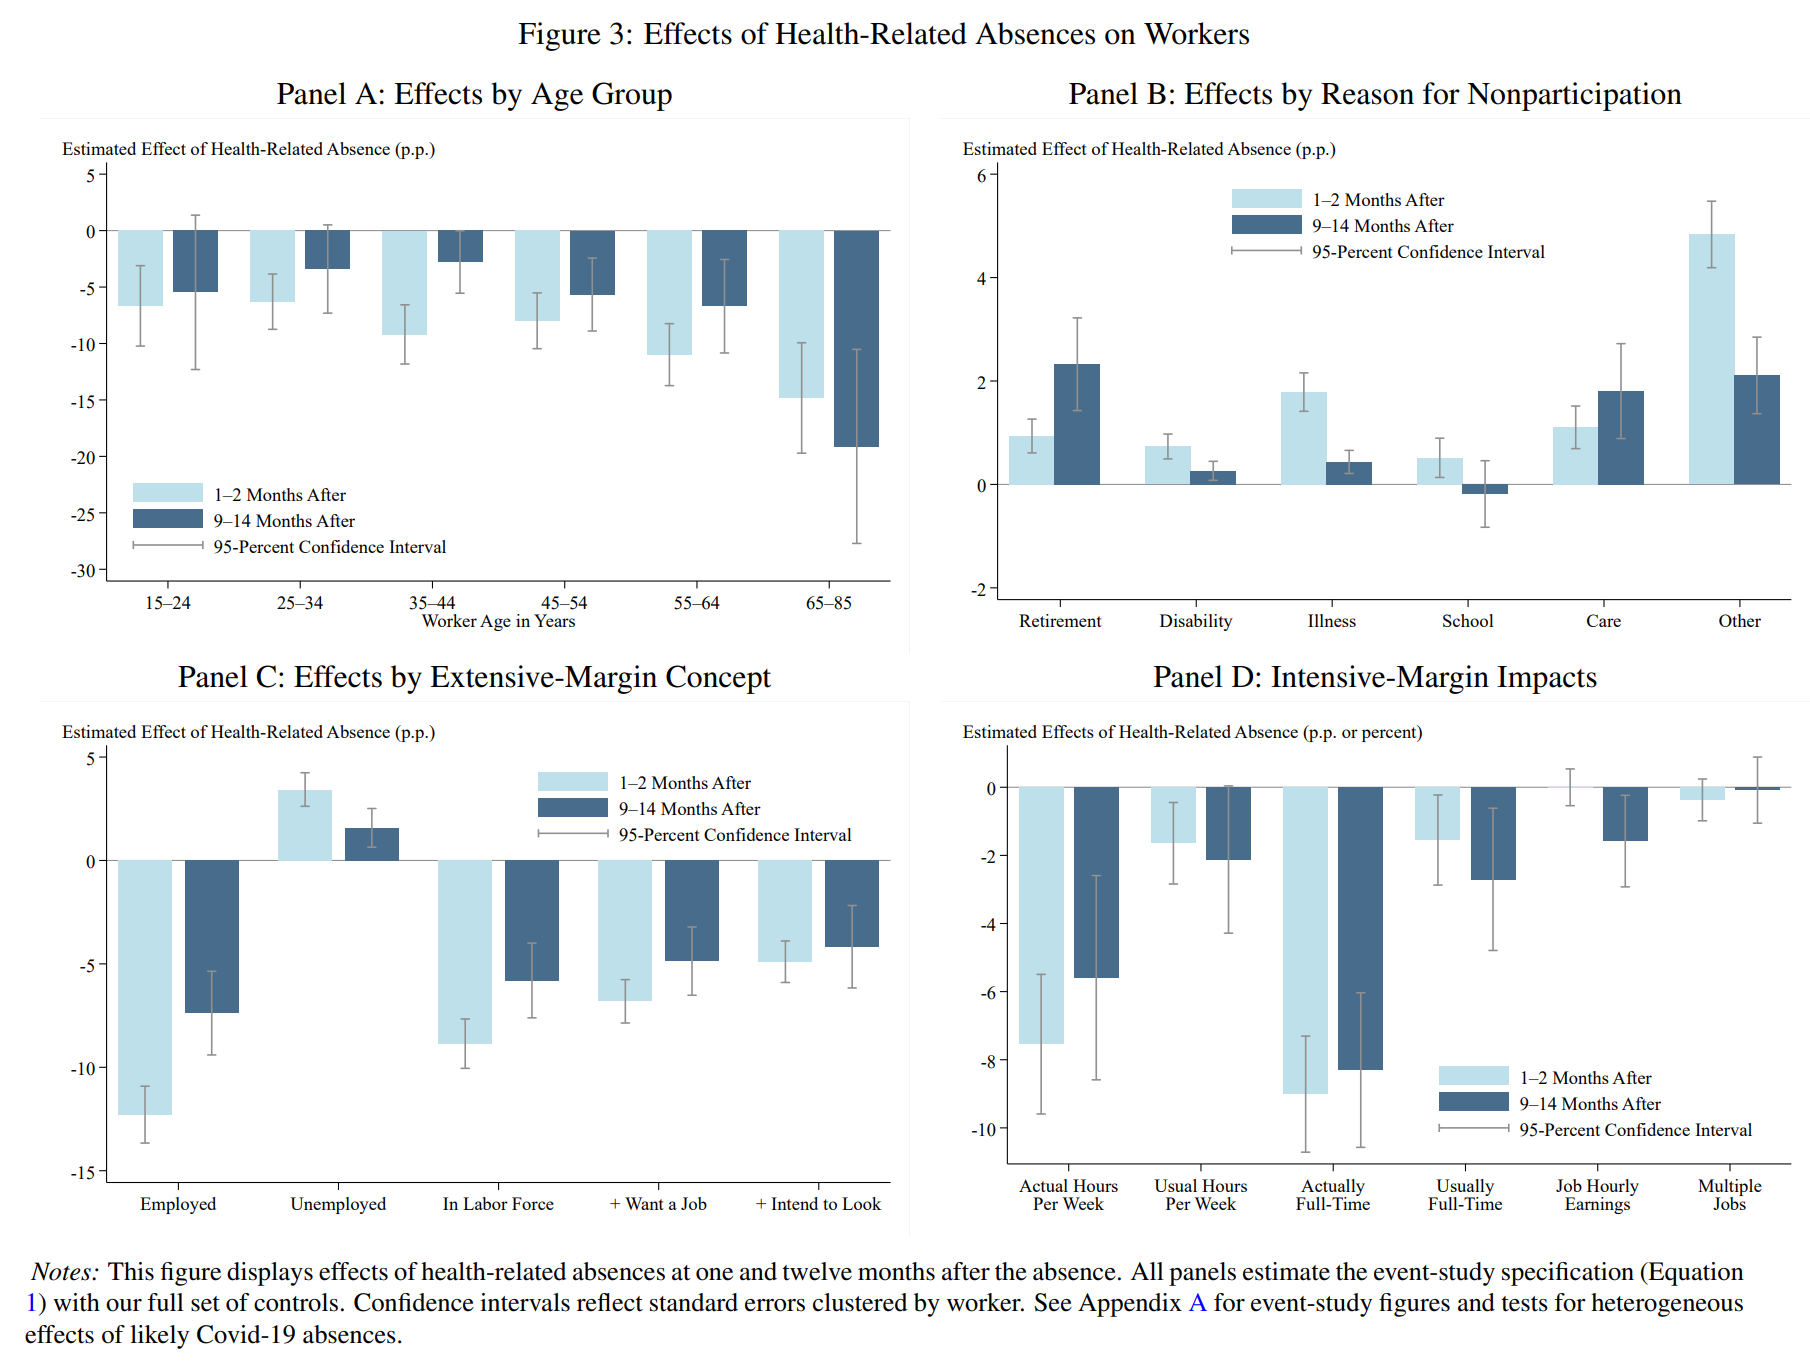 Effects of Health-Related Absences on Workers. This figure displays effects of health-related absences at one and twelve months after the absence. All panels estimate the event-study specification. Graphic: Goda and Soltas, 2022 / NBER